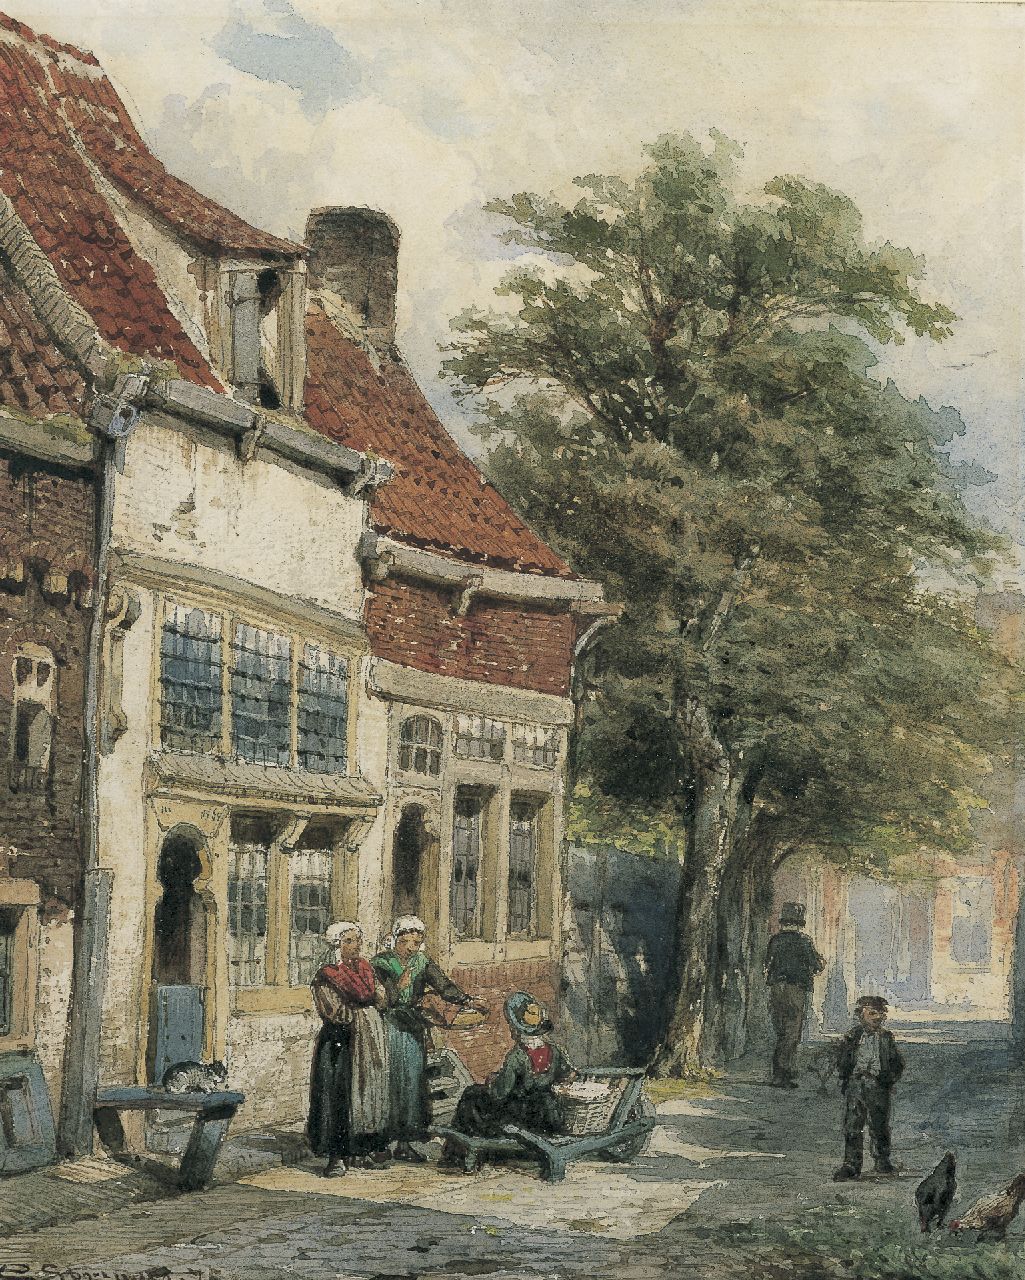 Springer C.  | Cornelis Springer, Laundry day in an old Dutch street, pencil and watercolour on paper 24.6 x 19.8 cm, signed l.l. and dated '75